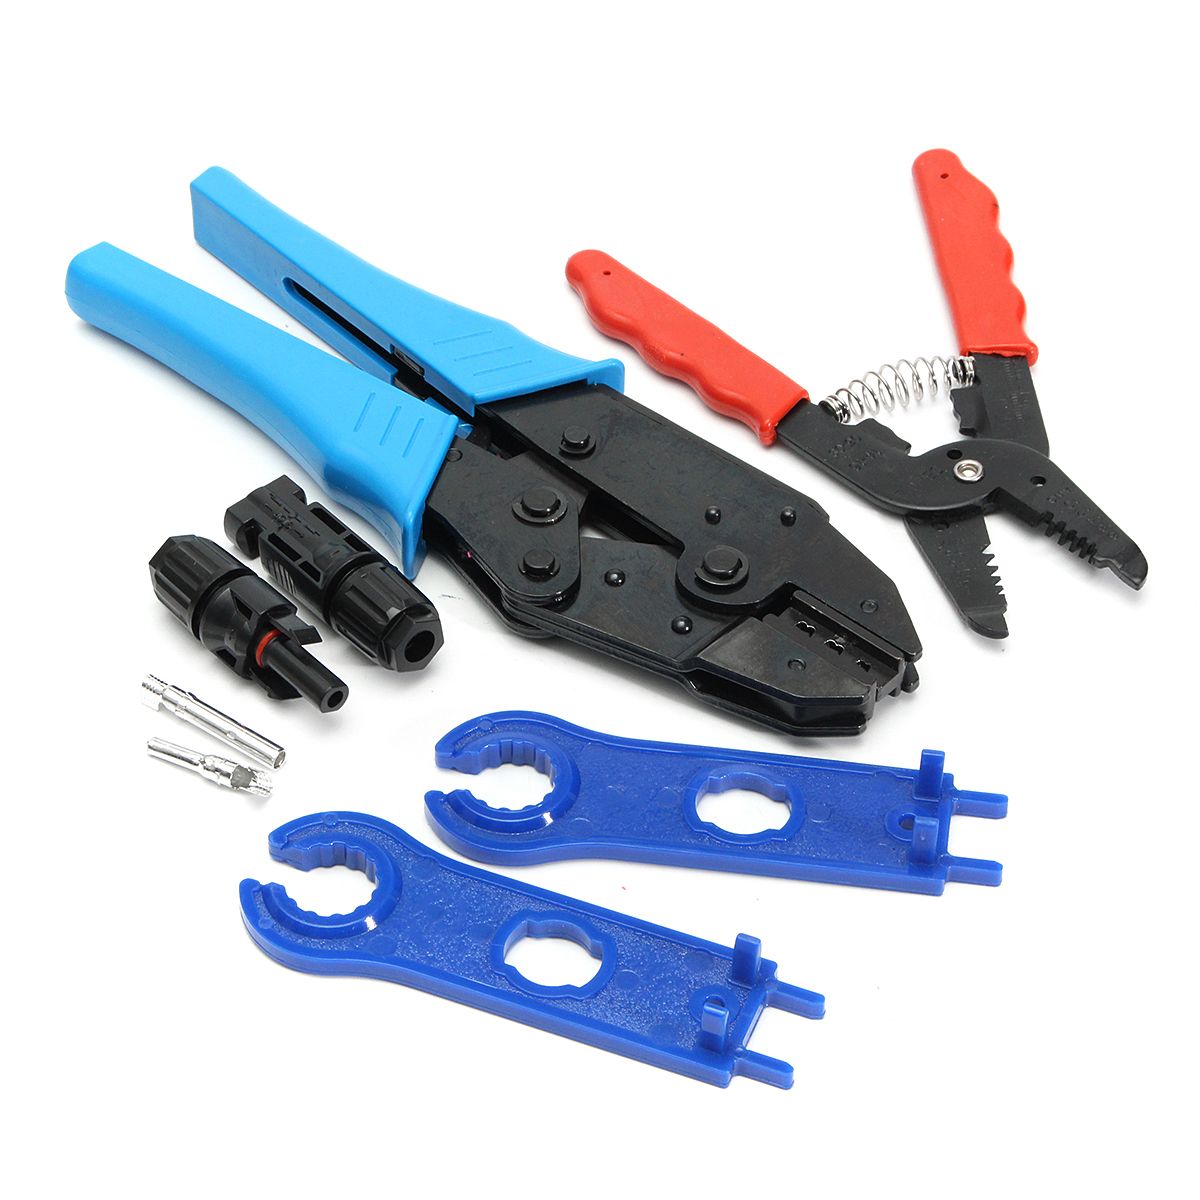 Solar-PV-Tools-Kits-For-MC3MC4-Solar-Connectors-With-Crimping-Stripping-Cutting-1192024